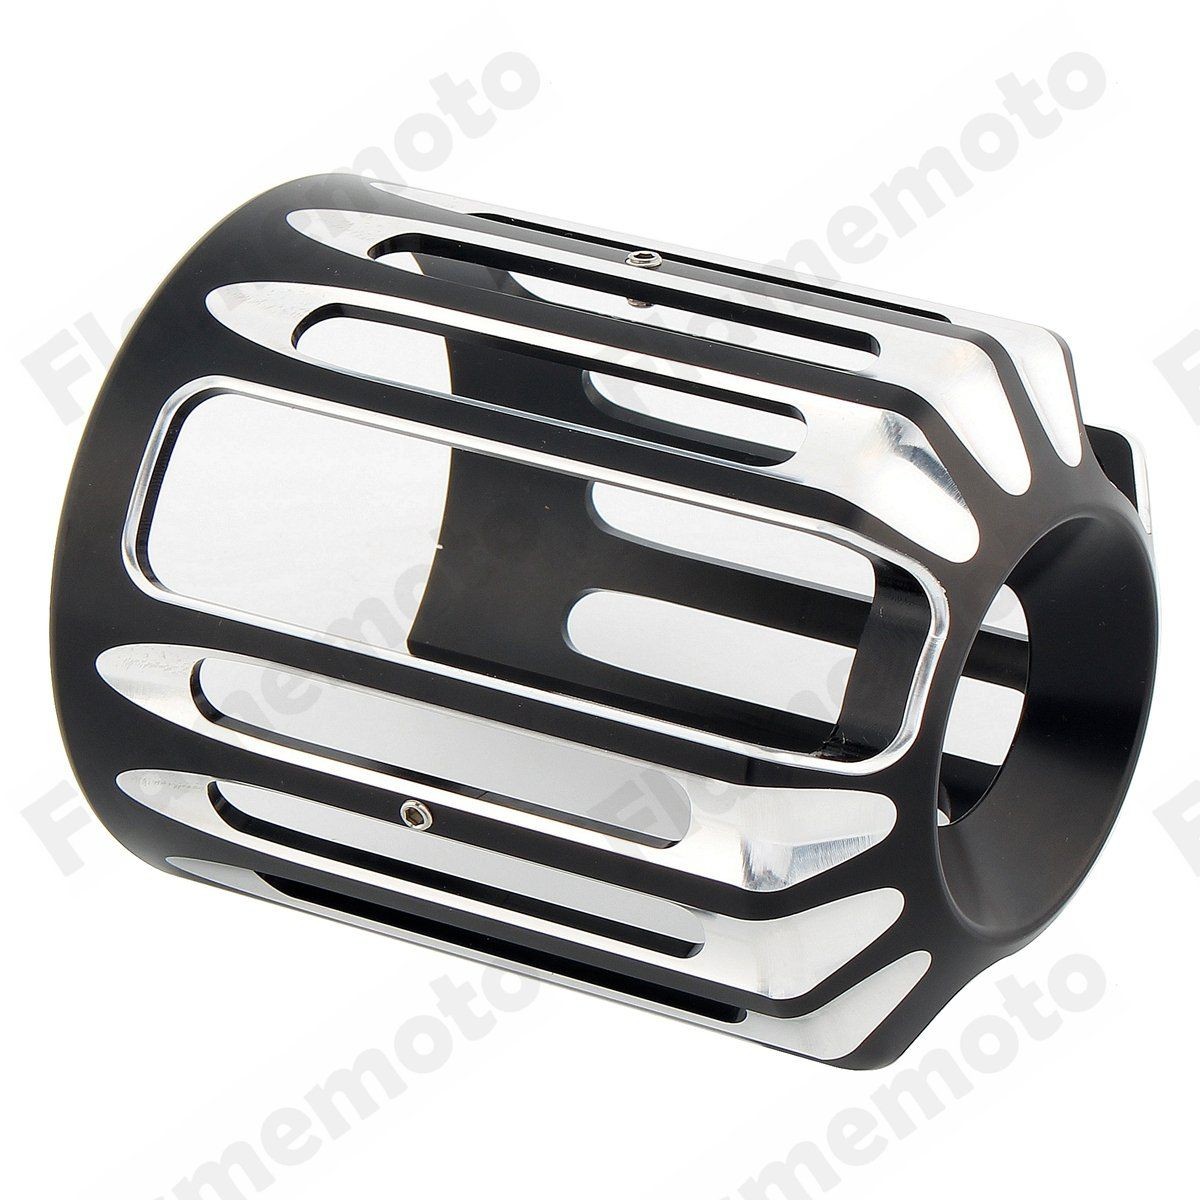 Motorcycle Bike Parts Black CNC Deep Cut Oil Filter Cover For Harley Touring Softail Dyna CVO